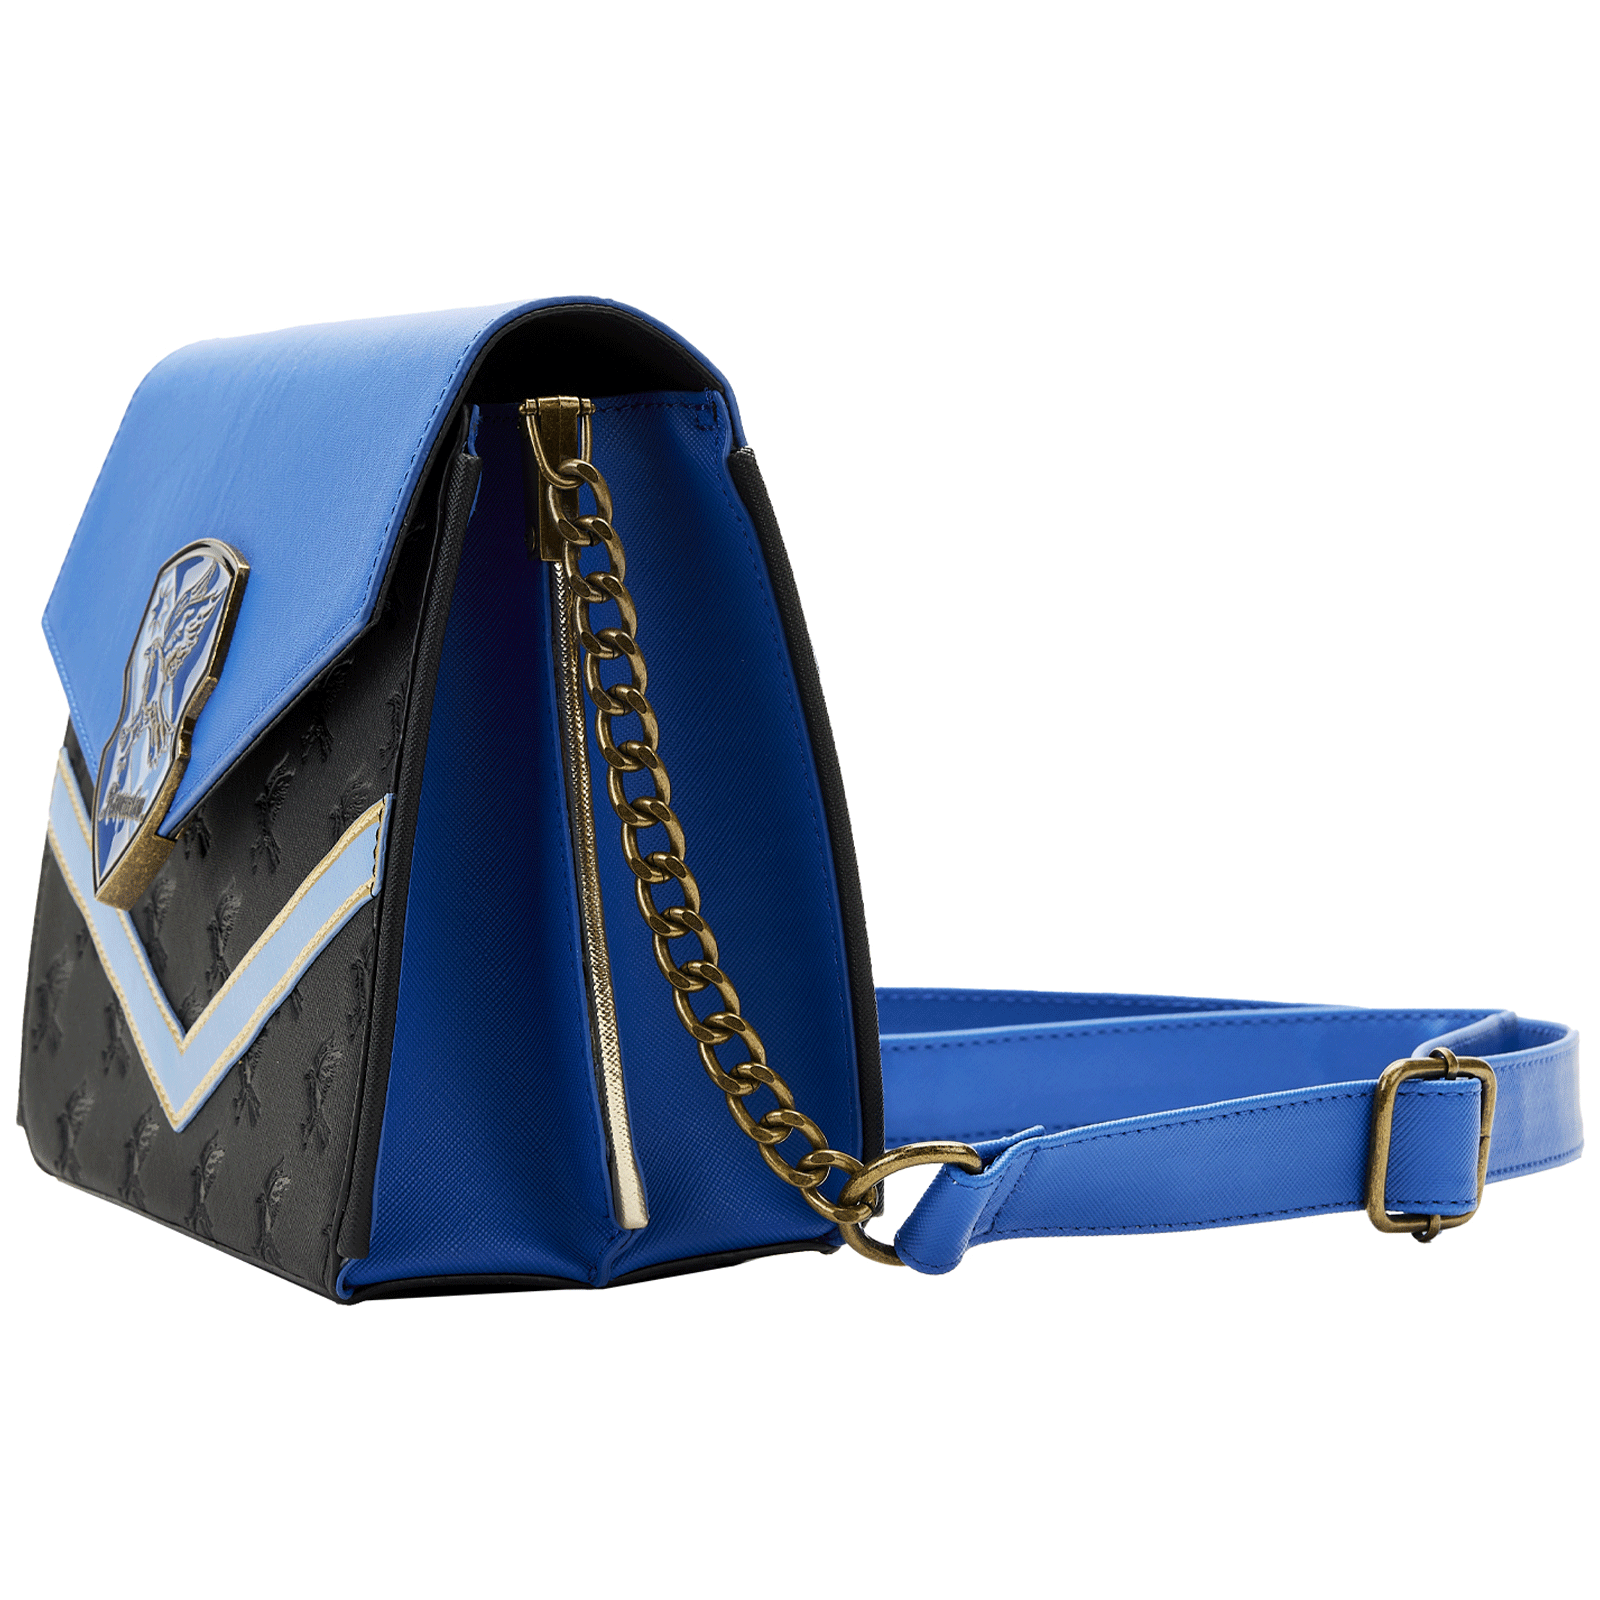 Loungefly x Harry Potter Ravenclaw Chain Strap Crossbody Bag